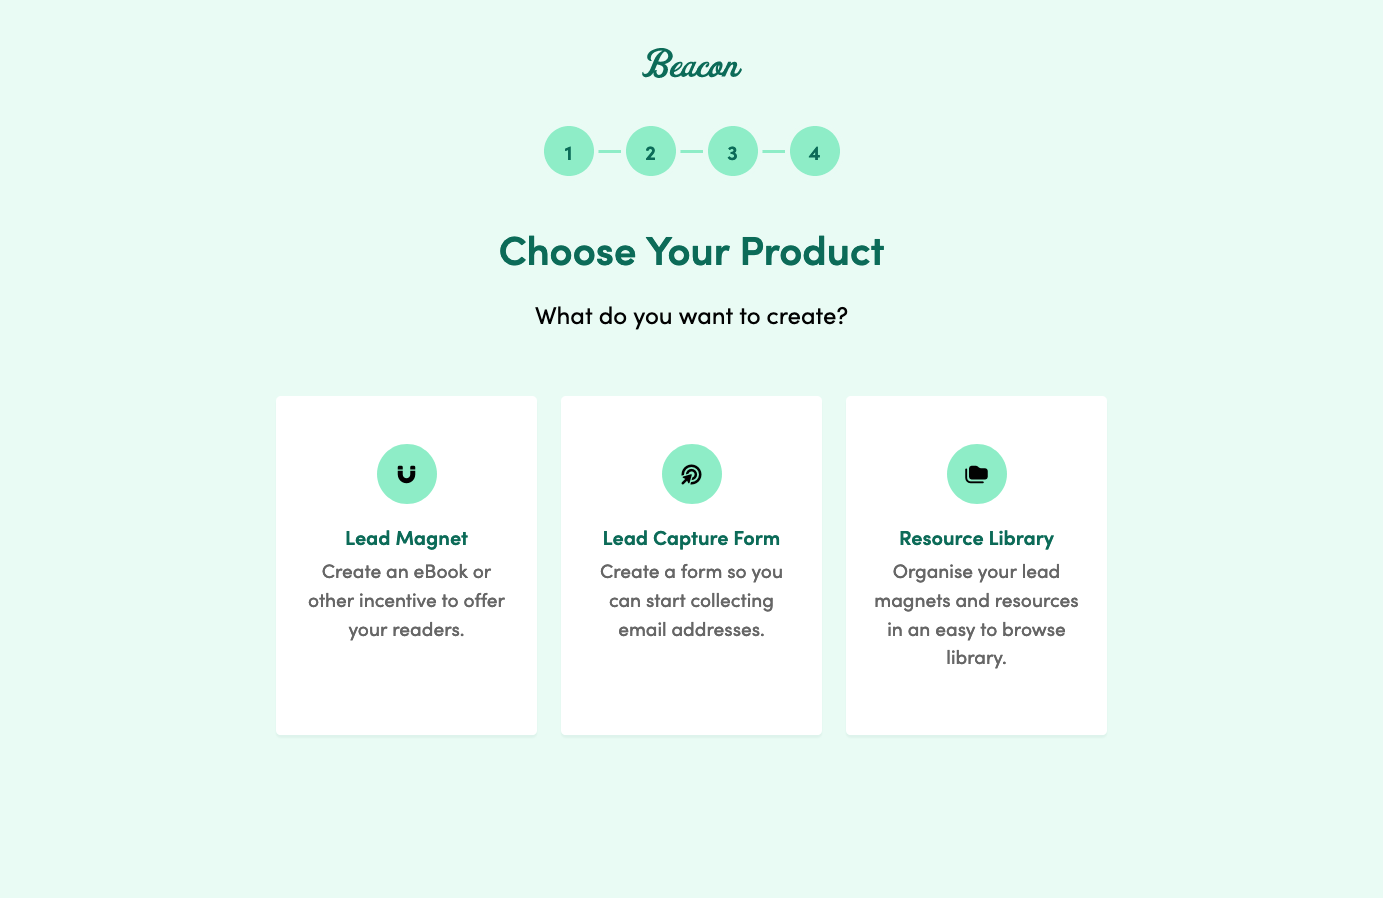 A screenshot of the Beacon onboarding process showing a choice between 3 products.